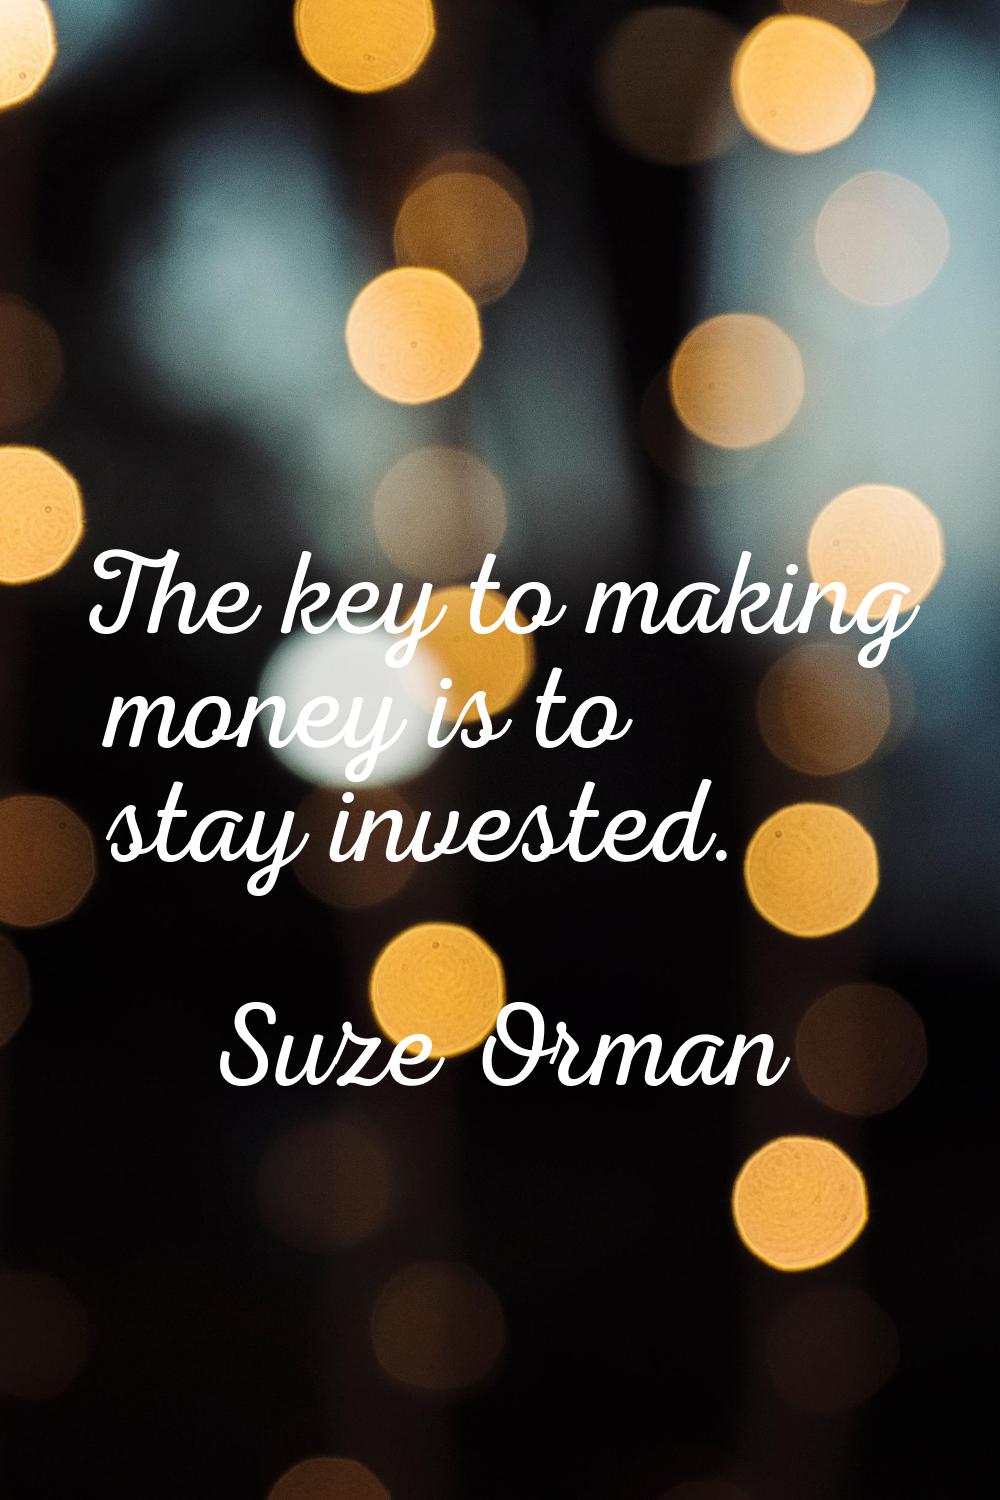 The key to making money is to stay invested.